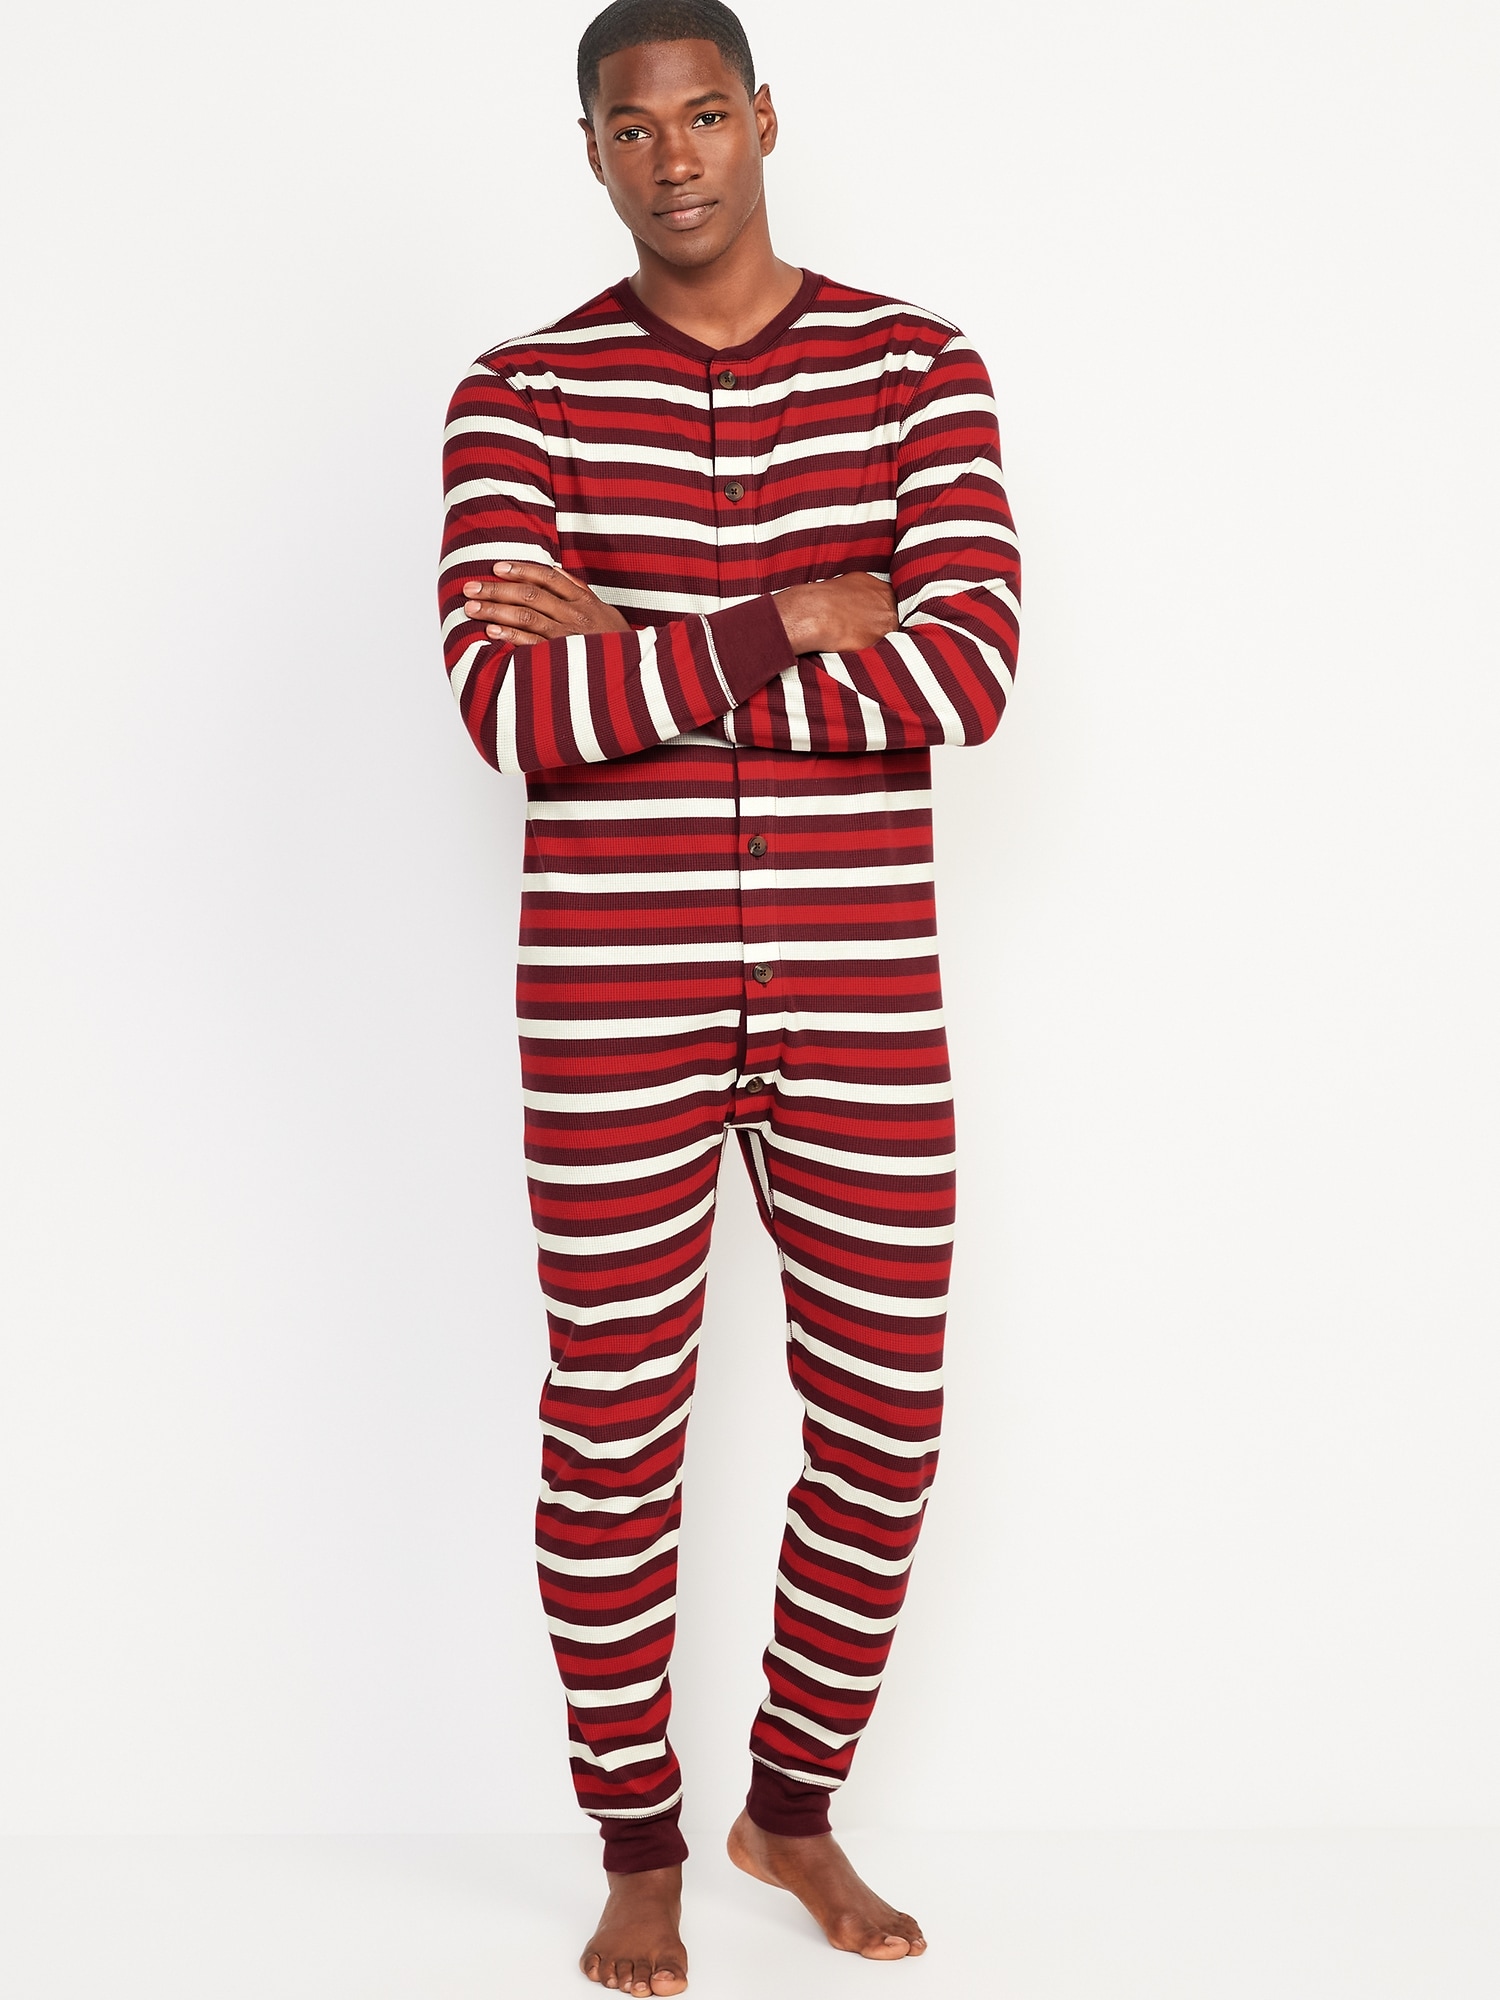 Thermal-Knit Pajama One-Piece for Women